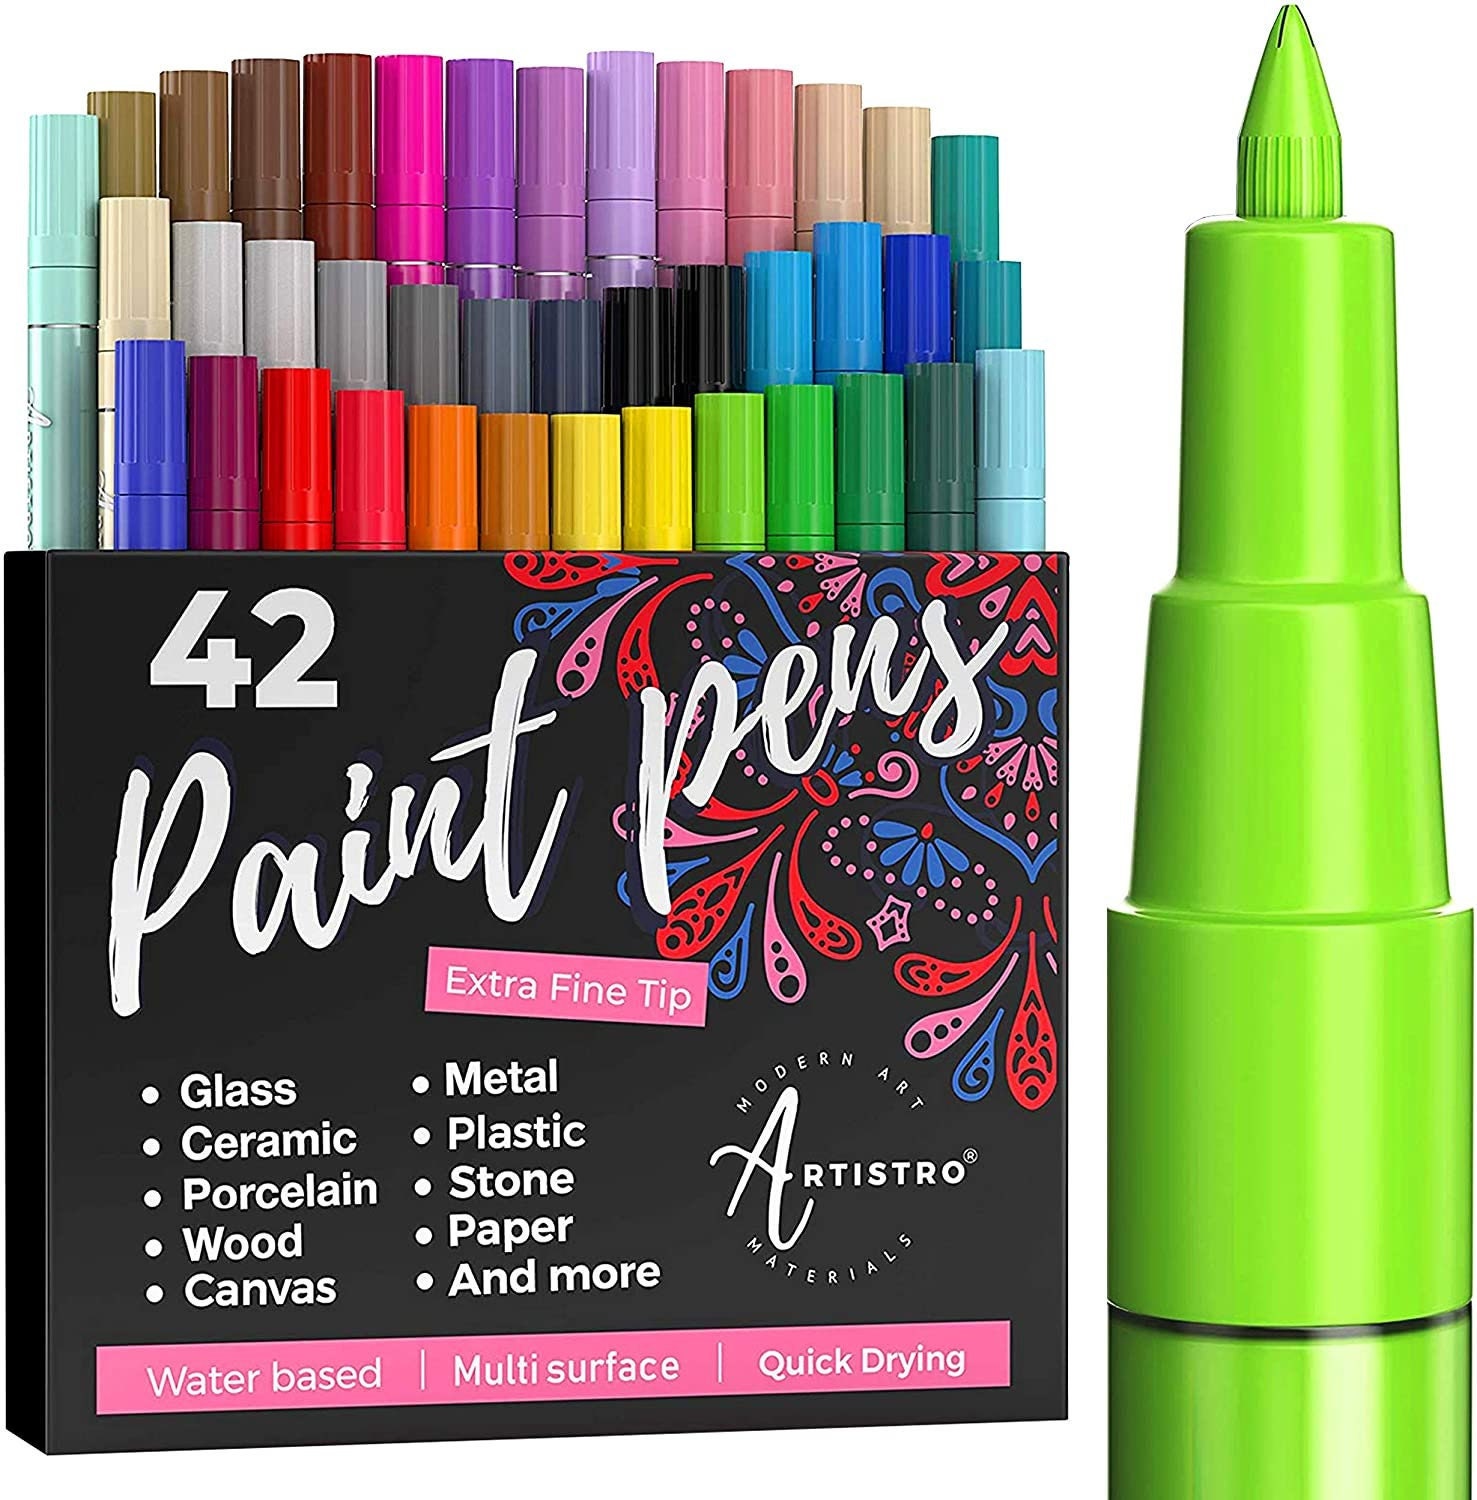 42 Artistro Acrylic Paint Pens Extra Fine Tip 0.7mm Great for Rock Painting,  Wood, Ceramic and Glass 40 Colors Extra Black&white -  Israel